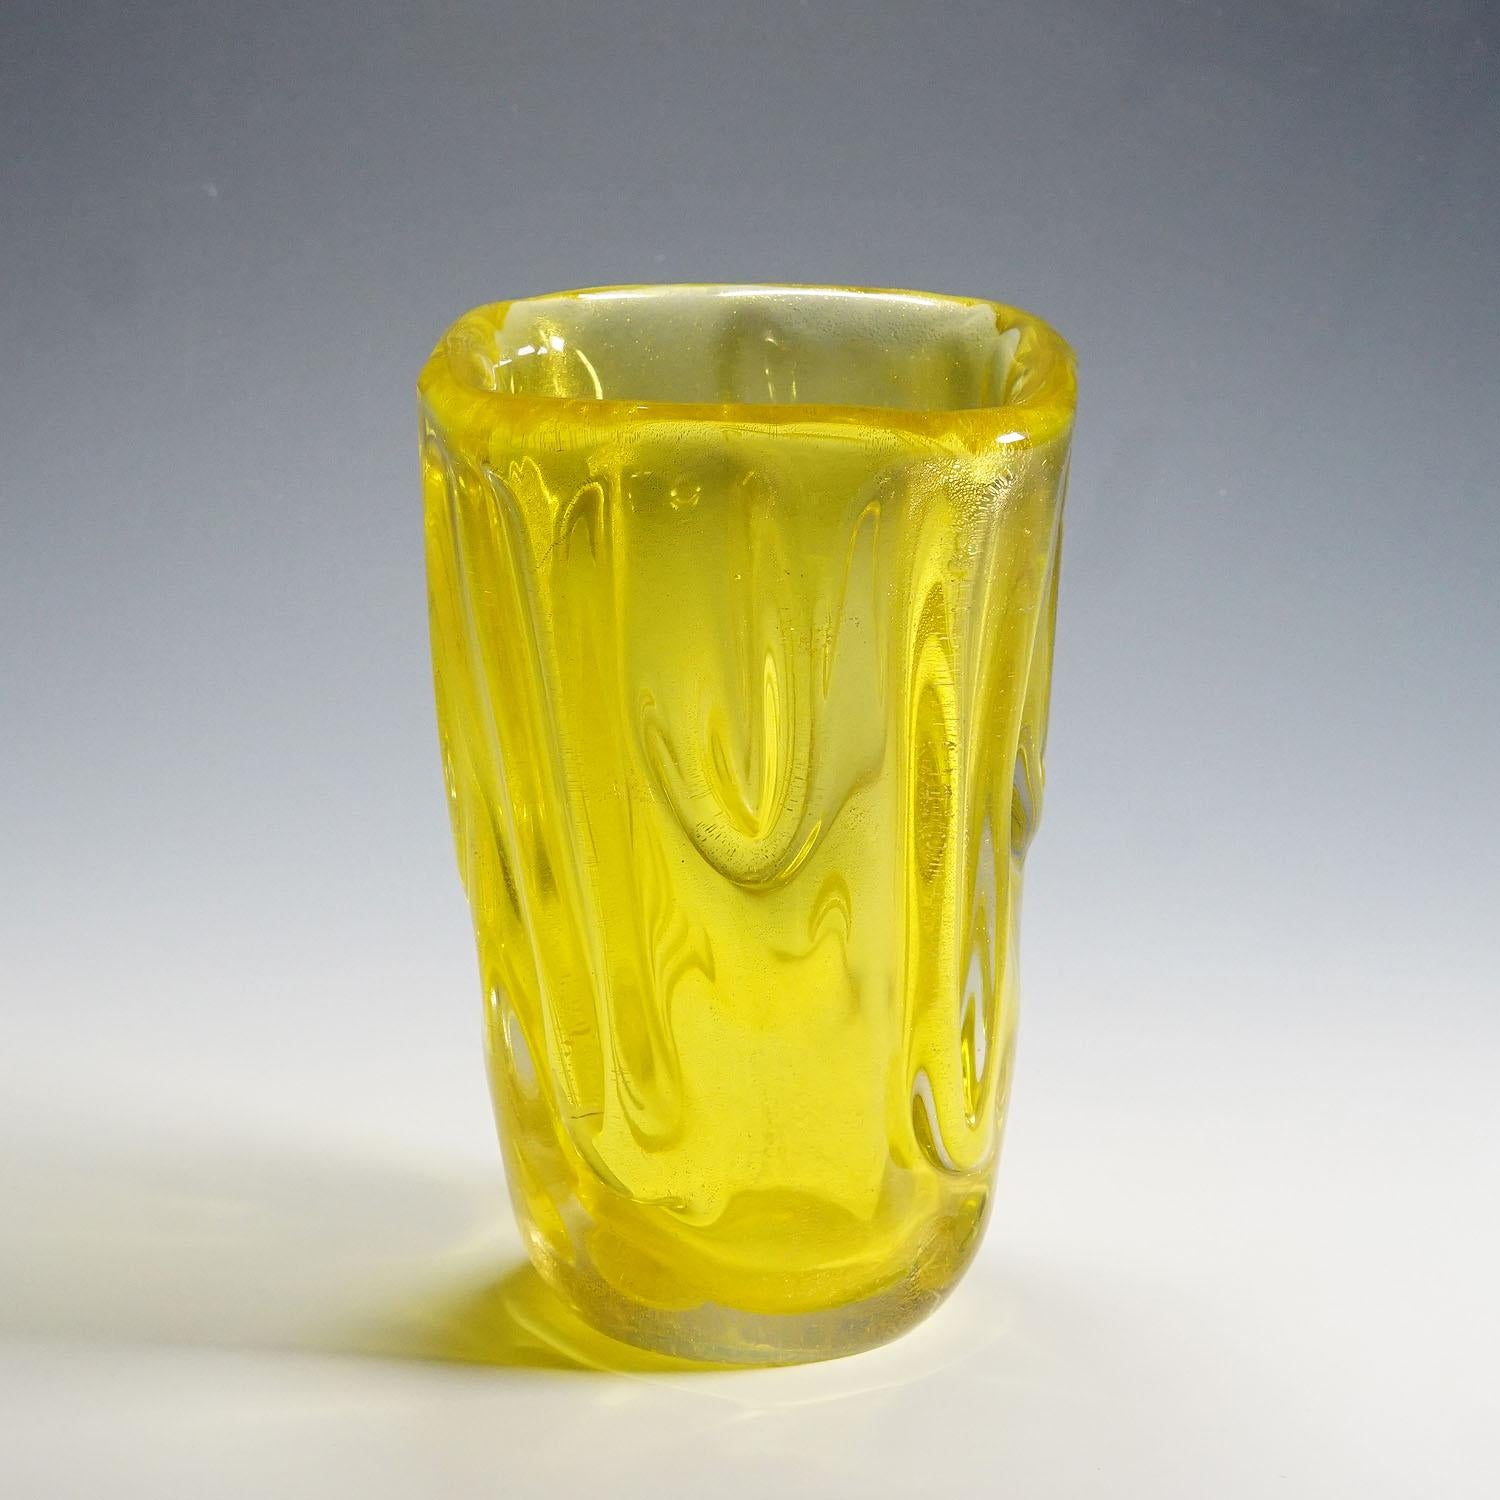 Flavio Poli for Seguso Vetri d'Arte Murano Sommerso glass vase 1930s

A large and heavy Murano sommerso glass vase. Manufactured by Seguso Vetri d'Arte circa 1930-40s. Manufactured in very thick yellow glass with gold foil inclusions in an